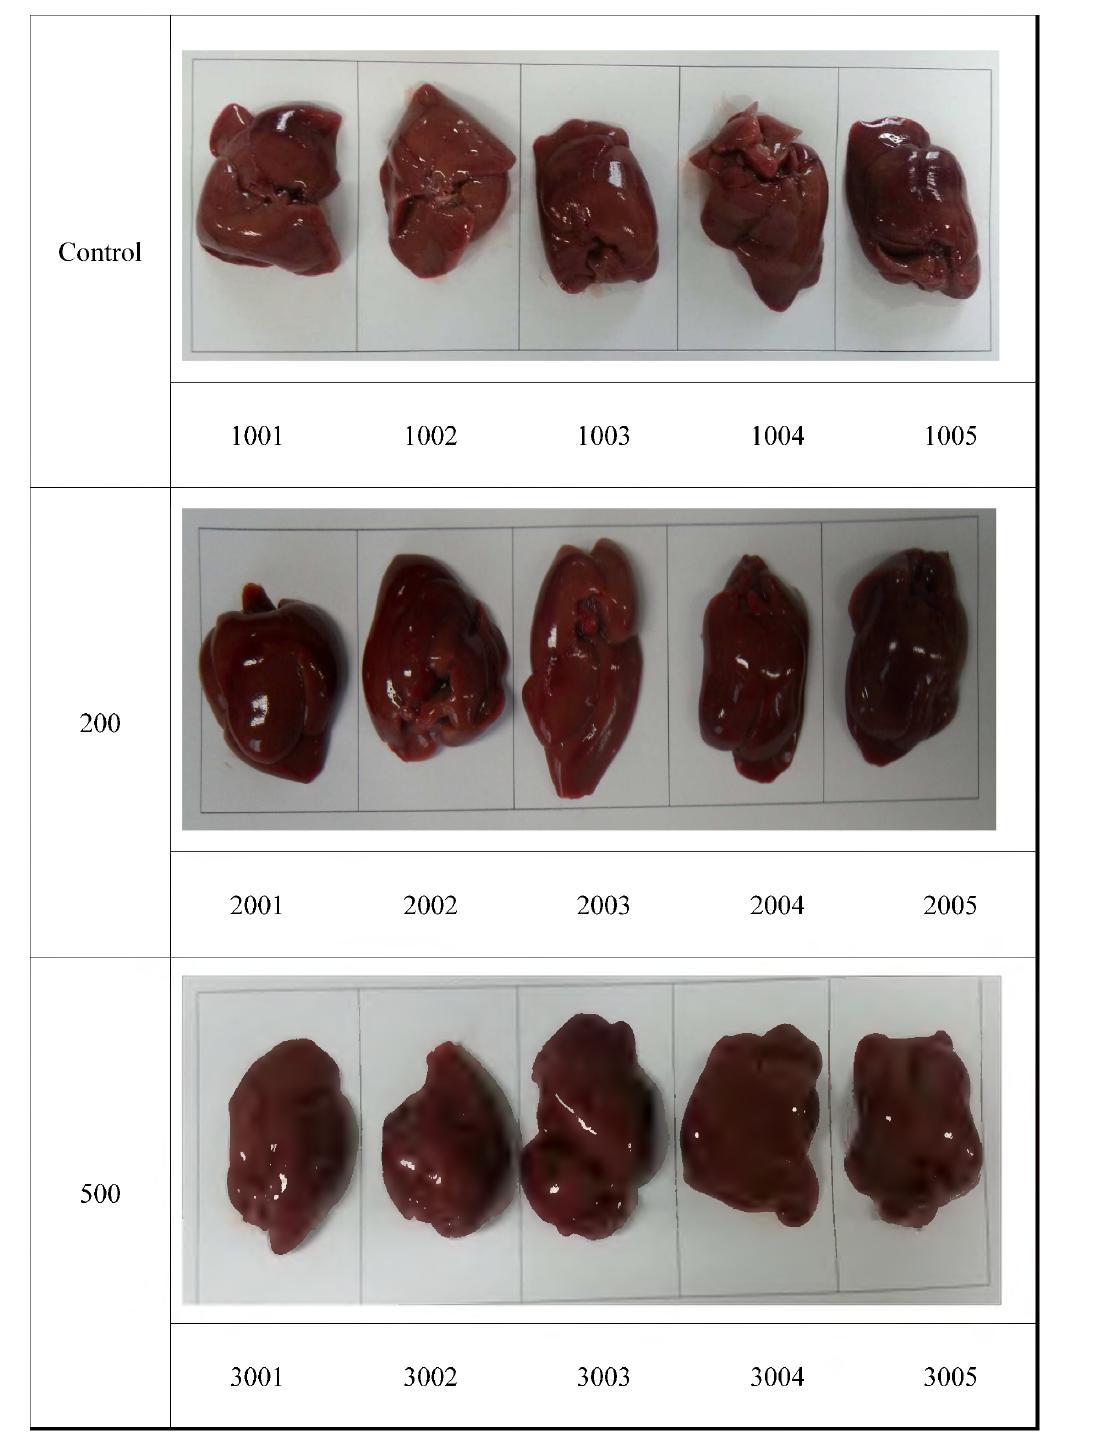 Appearance of liver in rats treated orally extracts from Hippophae rhamnoides